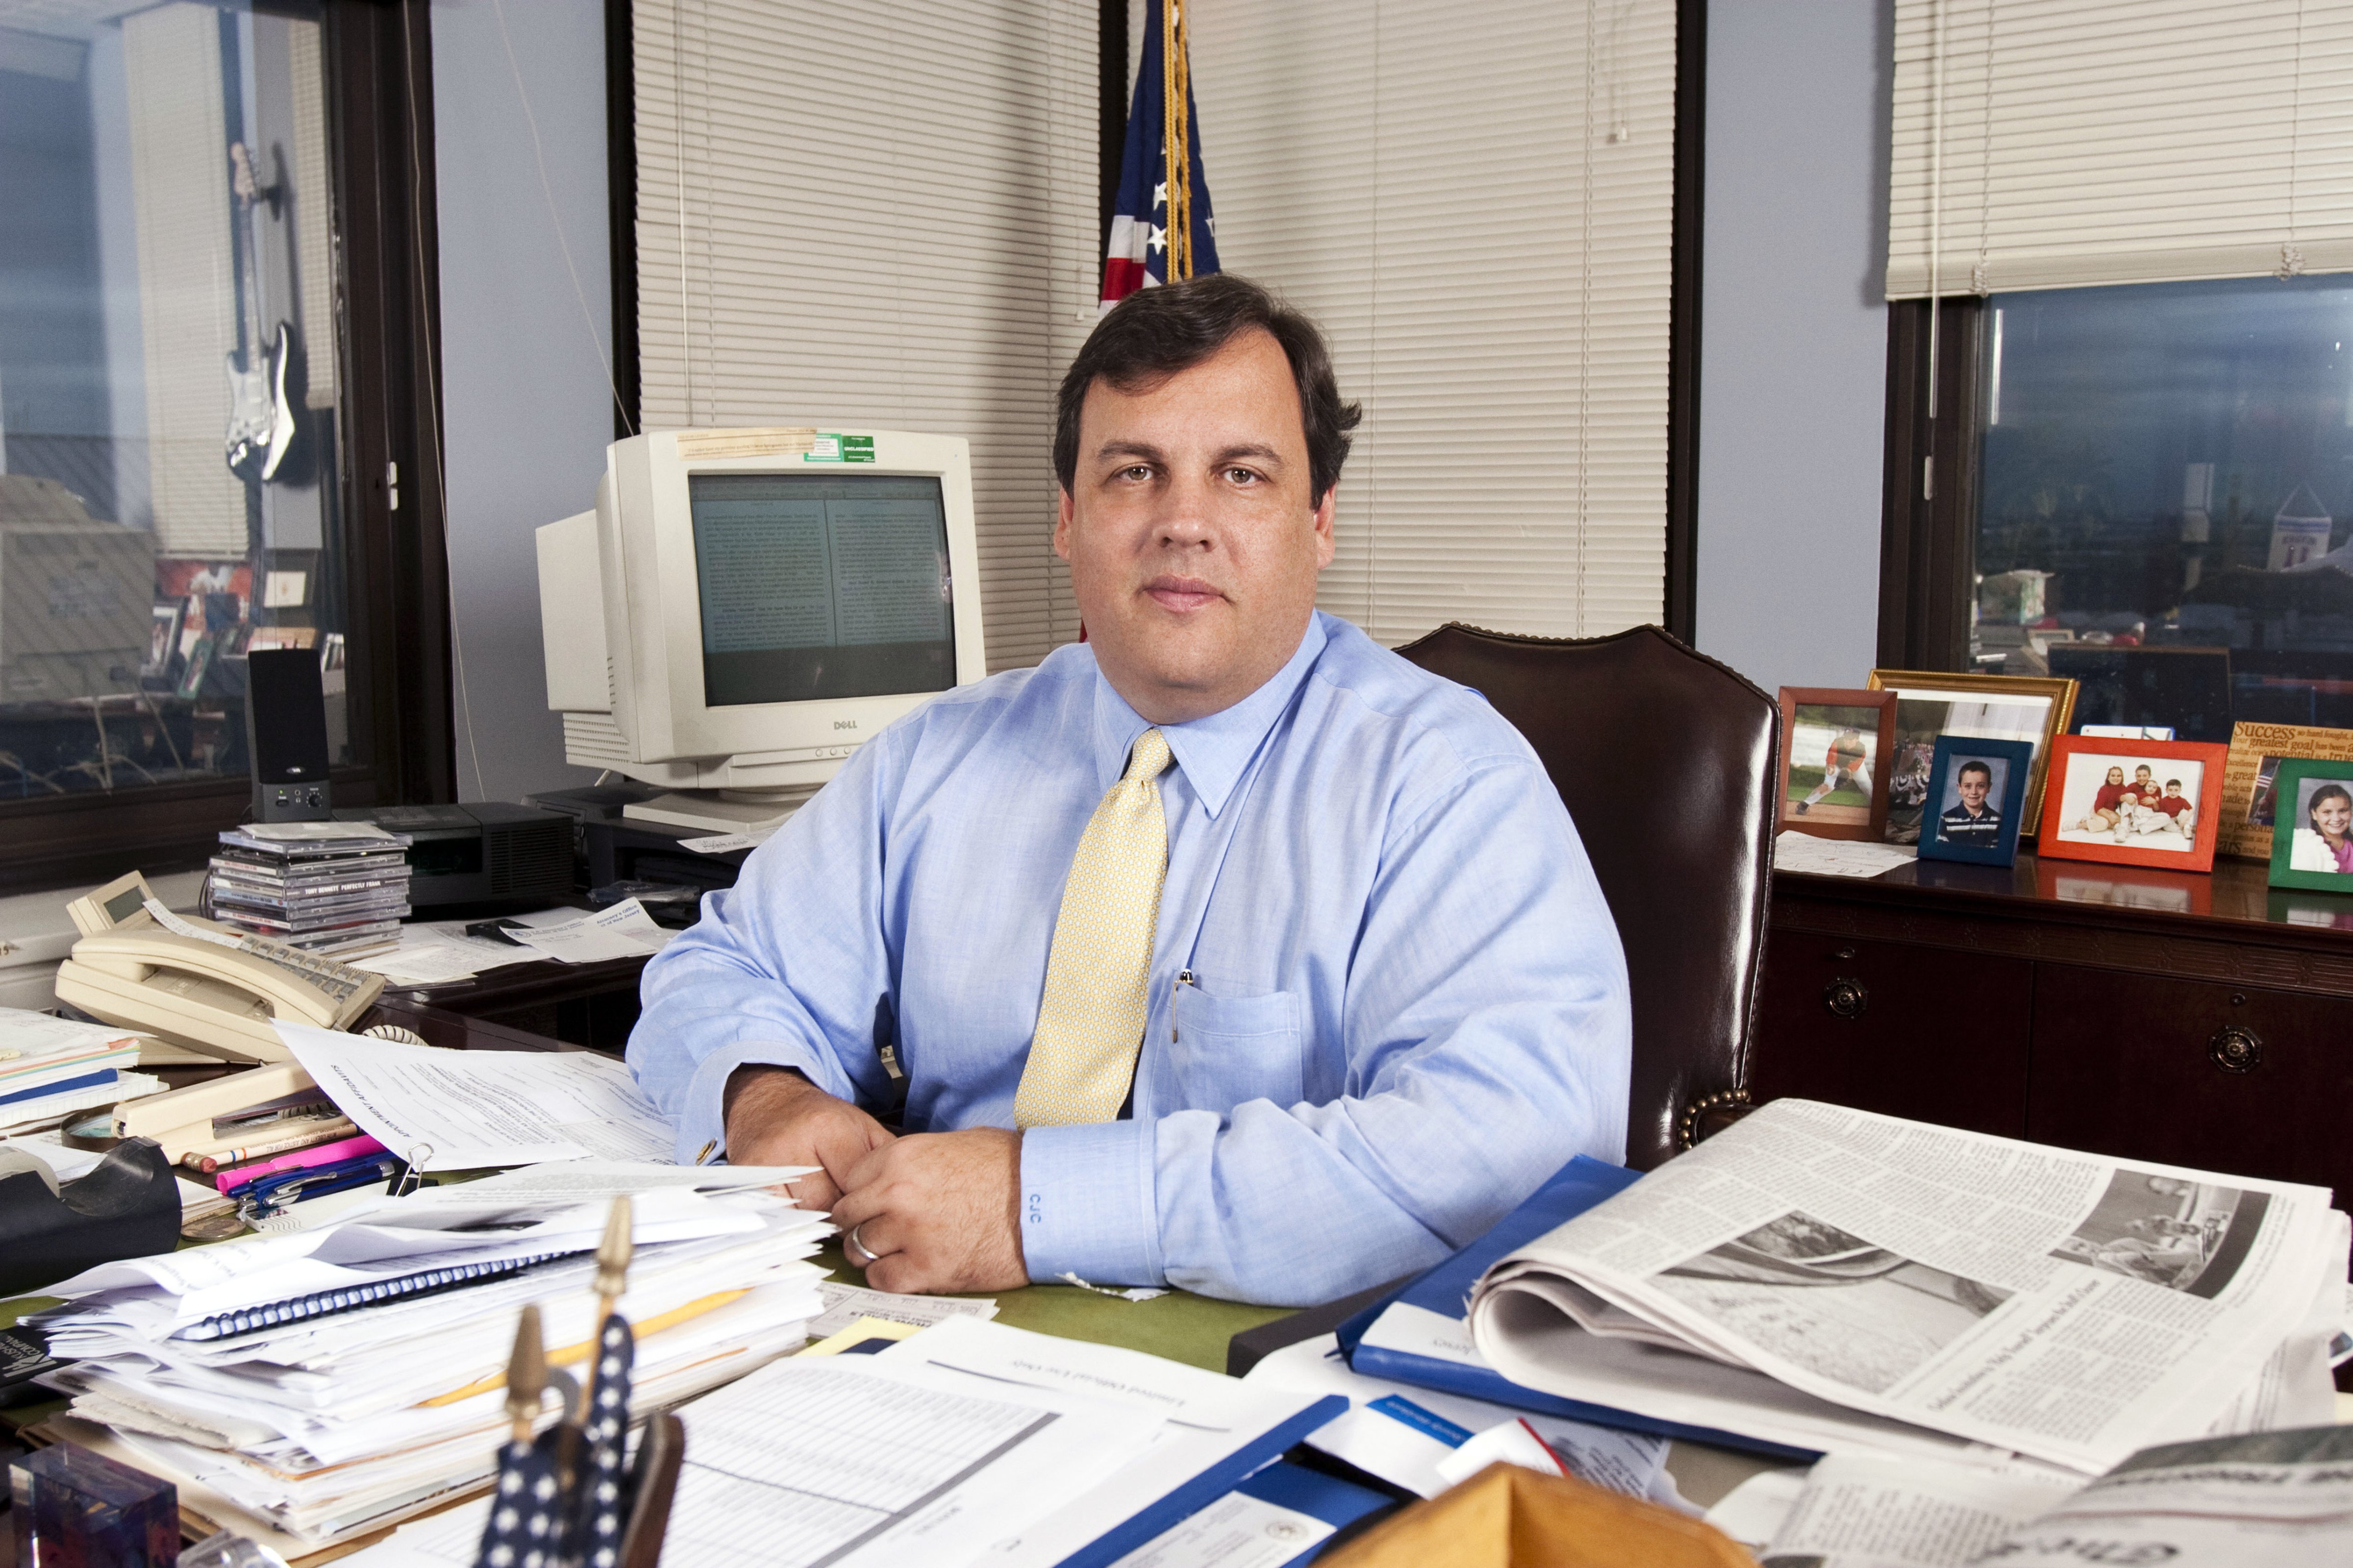 Then-U.S. Attorney Chris Christie, now New Jersey governor poses for a portrait in Trenton, N.J. on April 17, 2007. (Christopher Lane—Contour by Getty Images)